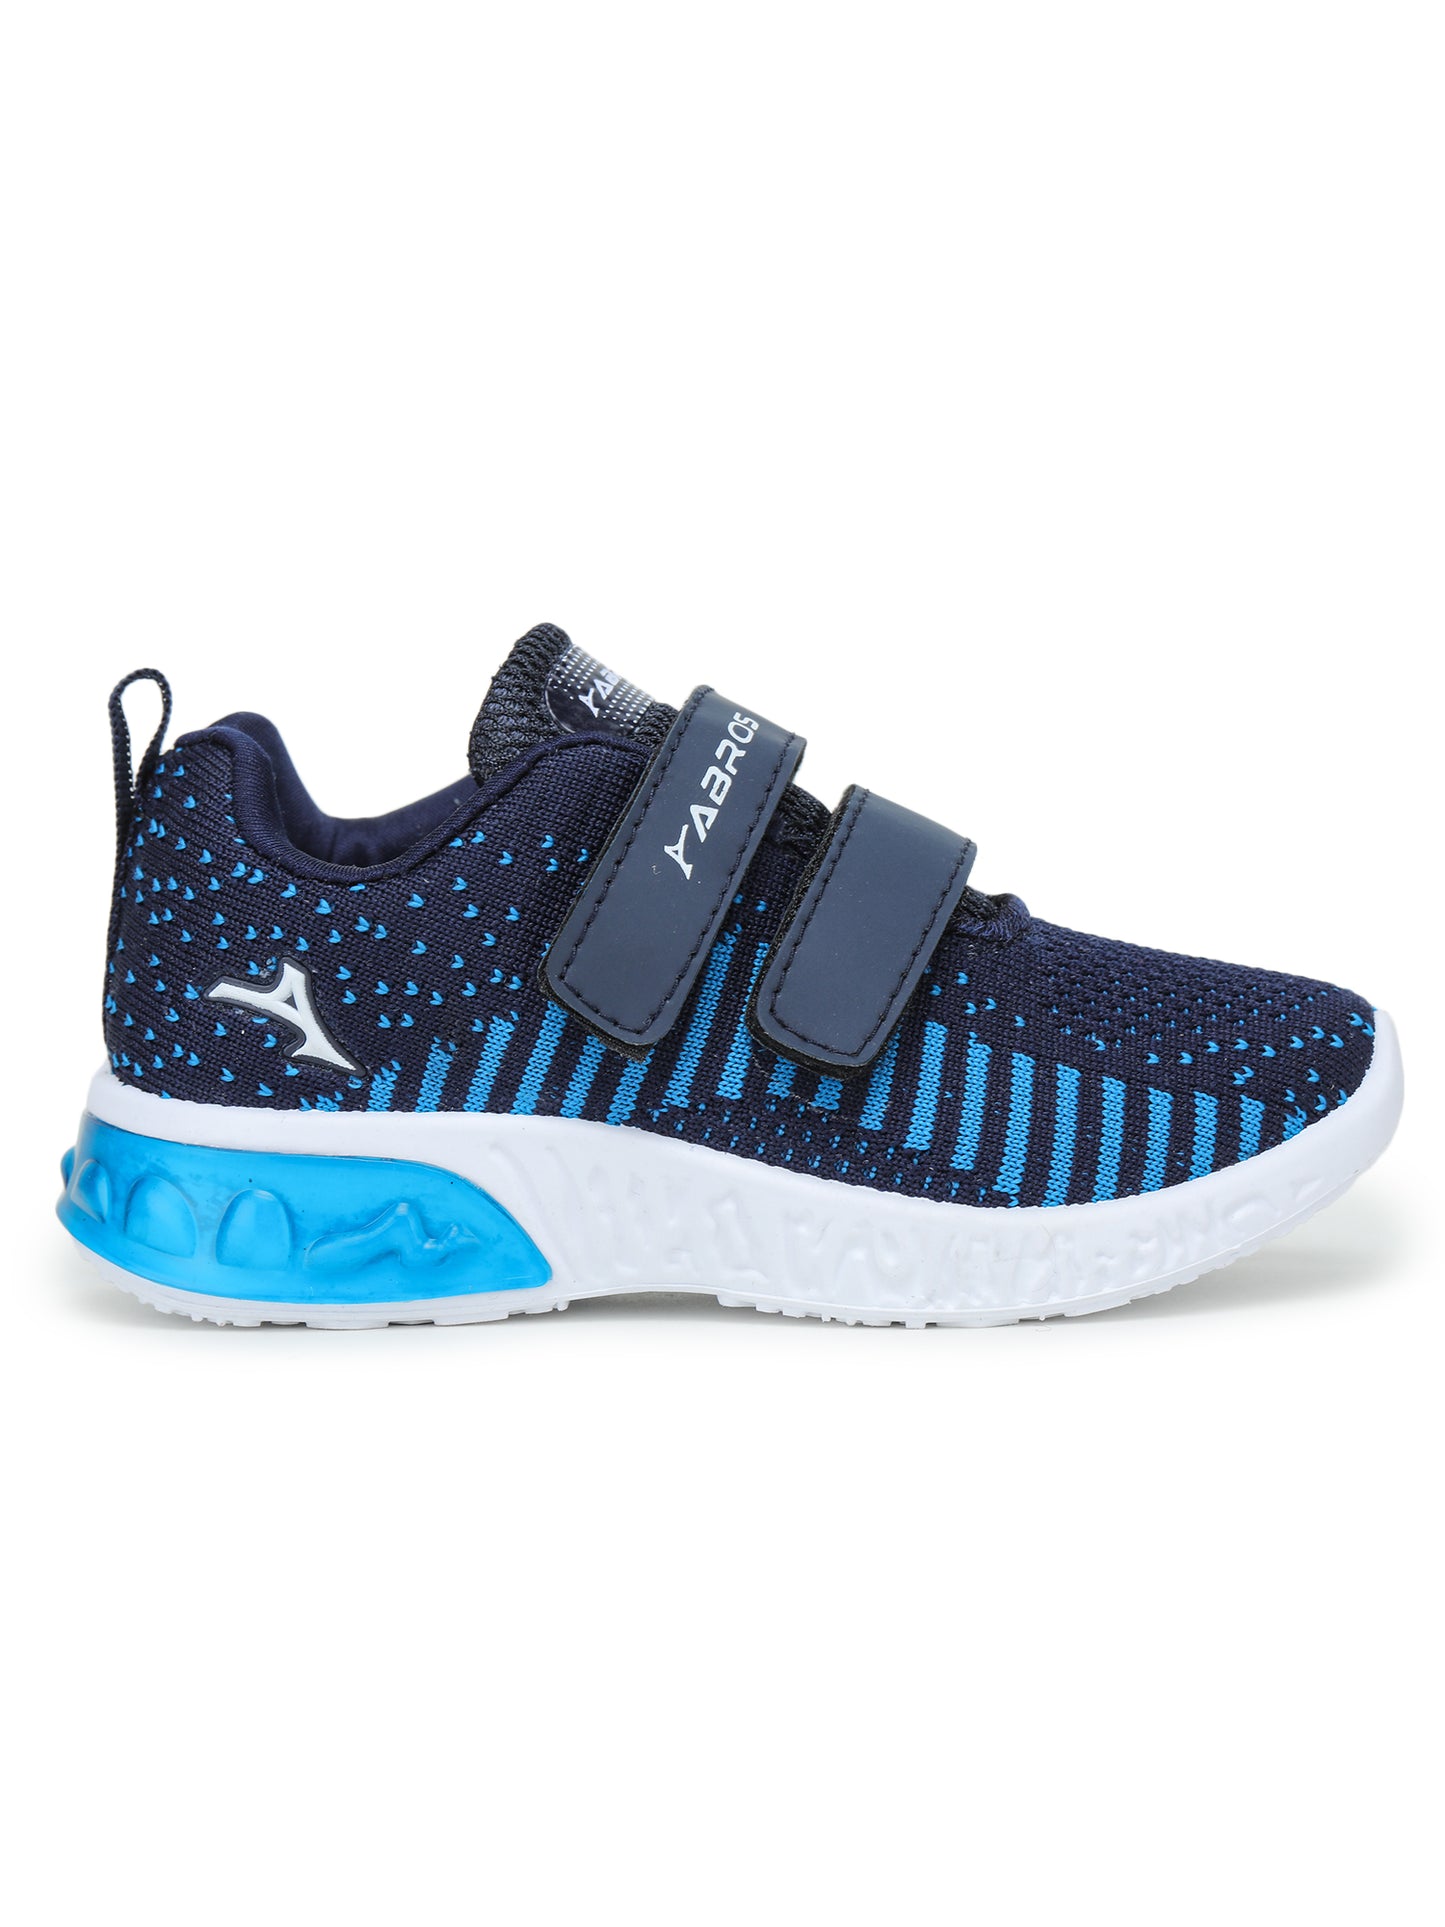 ABROS SHOOTER SPORTS SHOES FOR KIDS